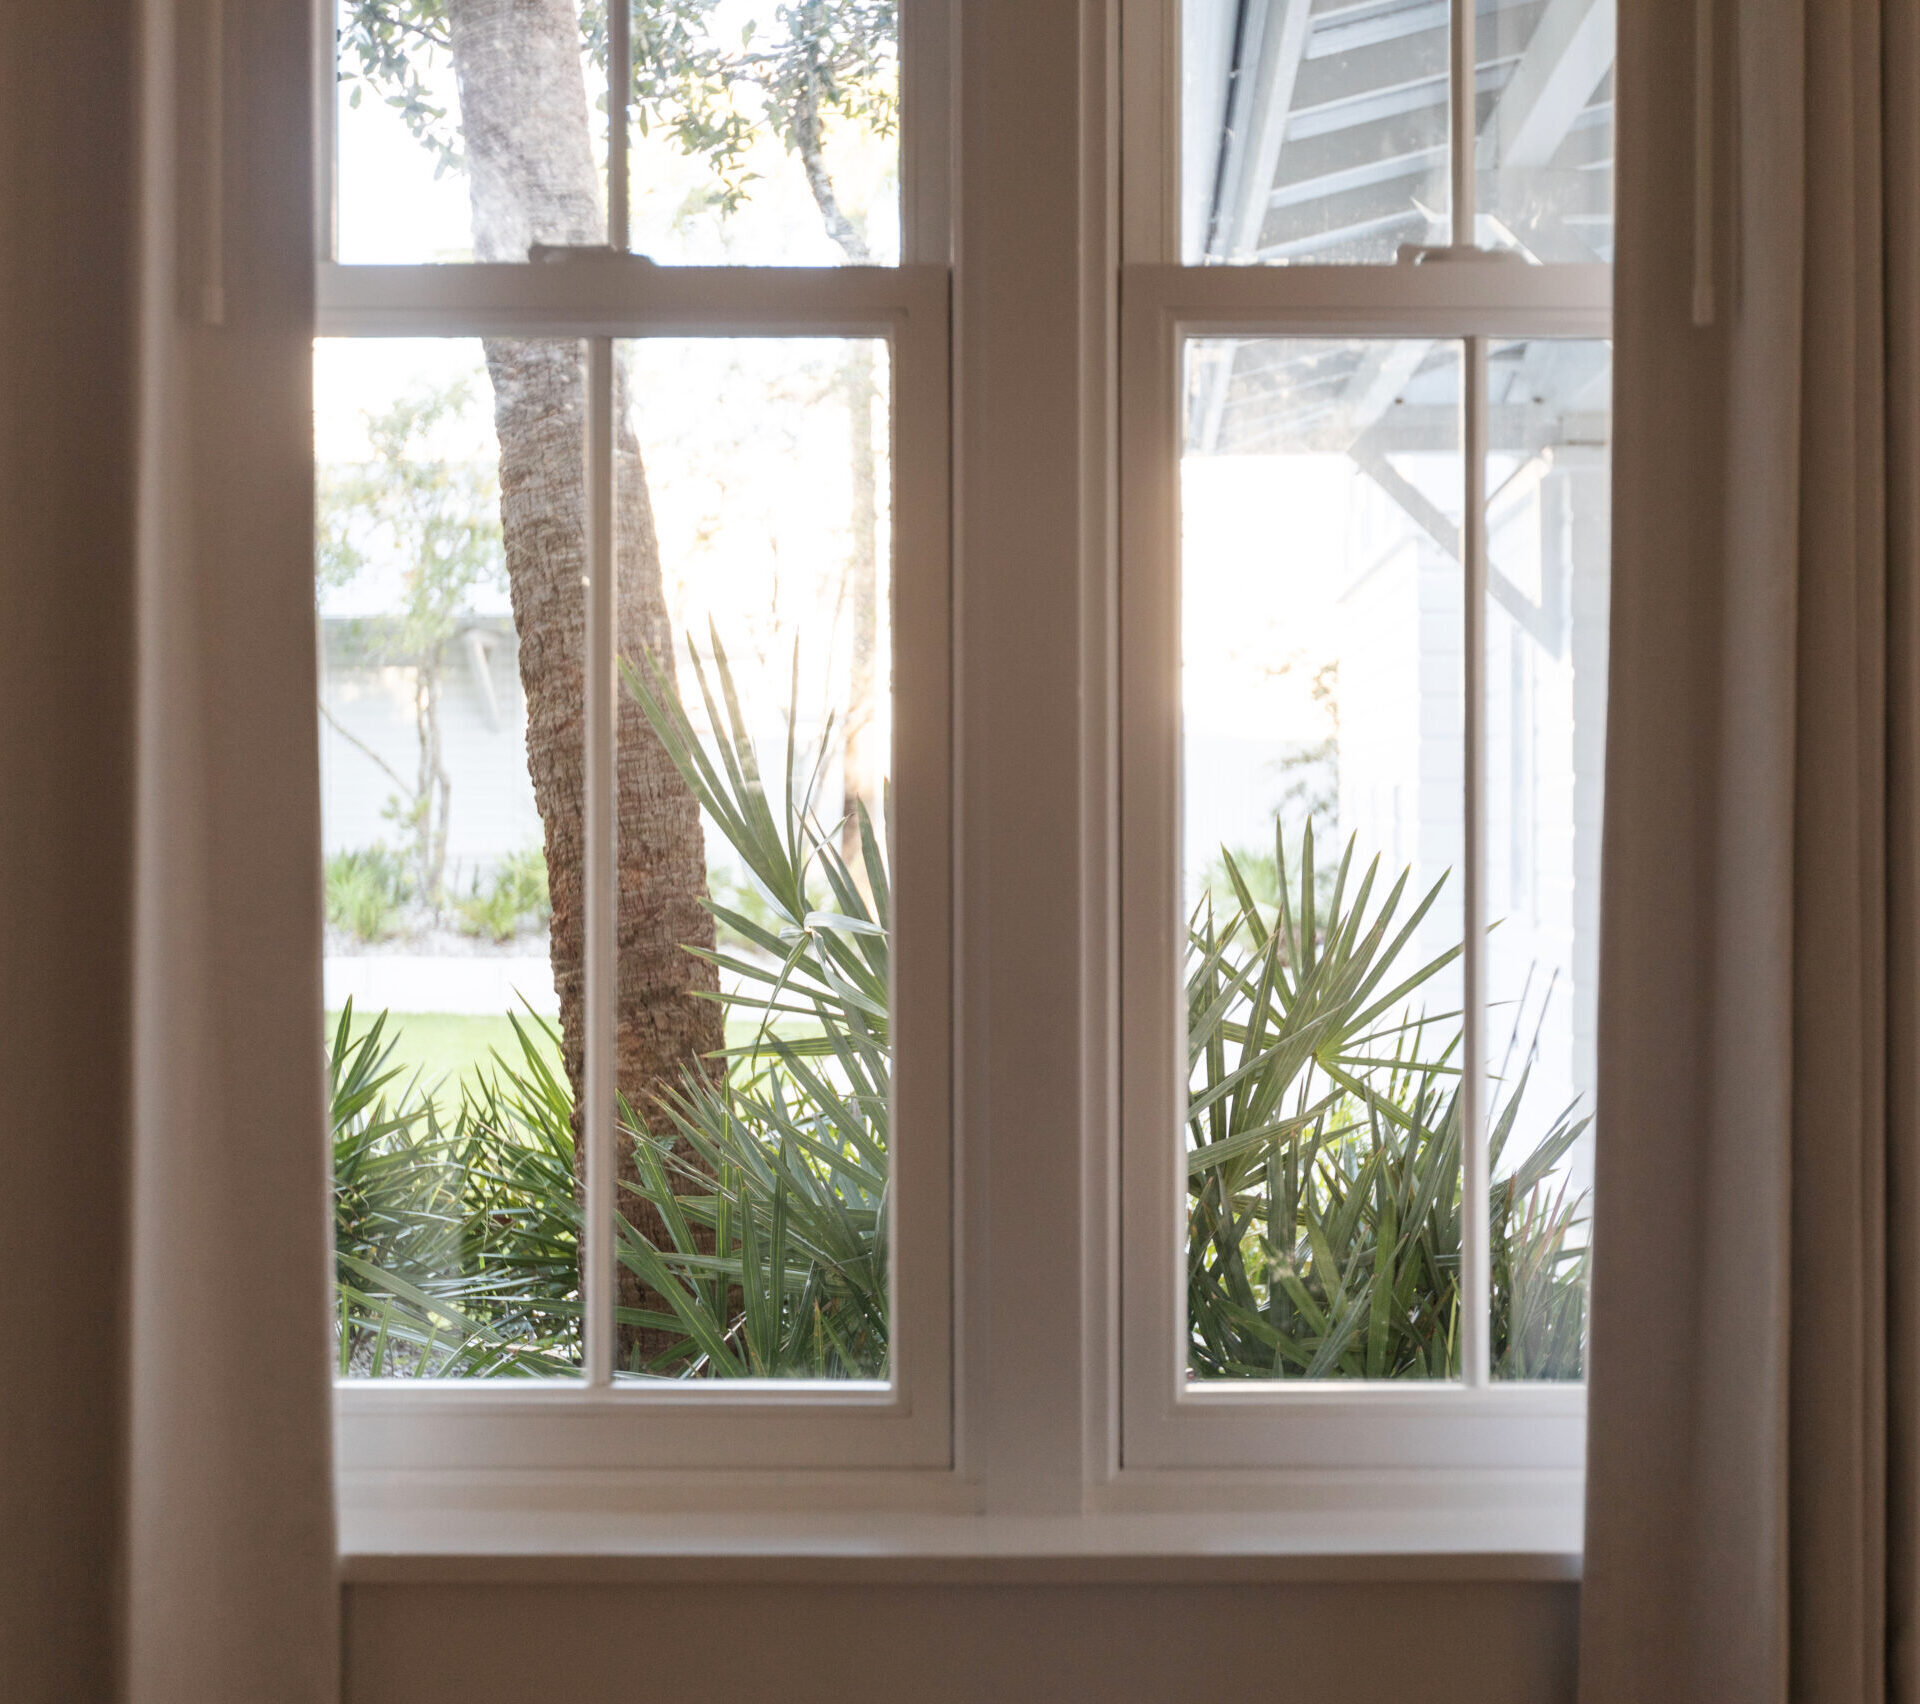 Picture of the window with the garden view